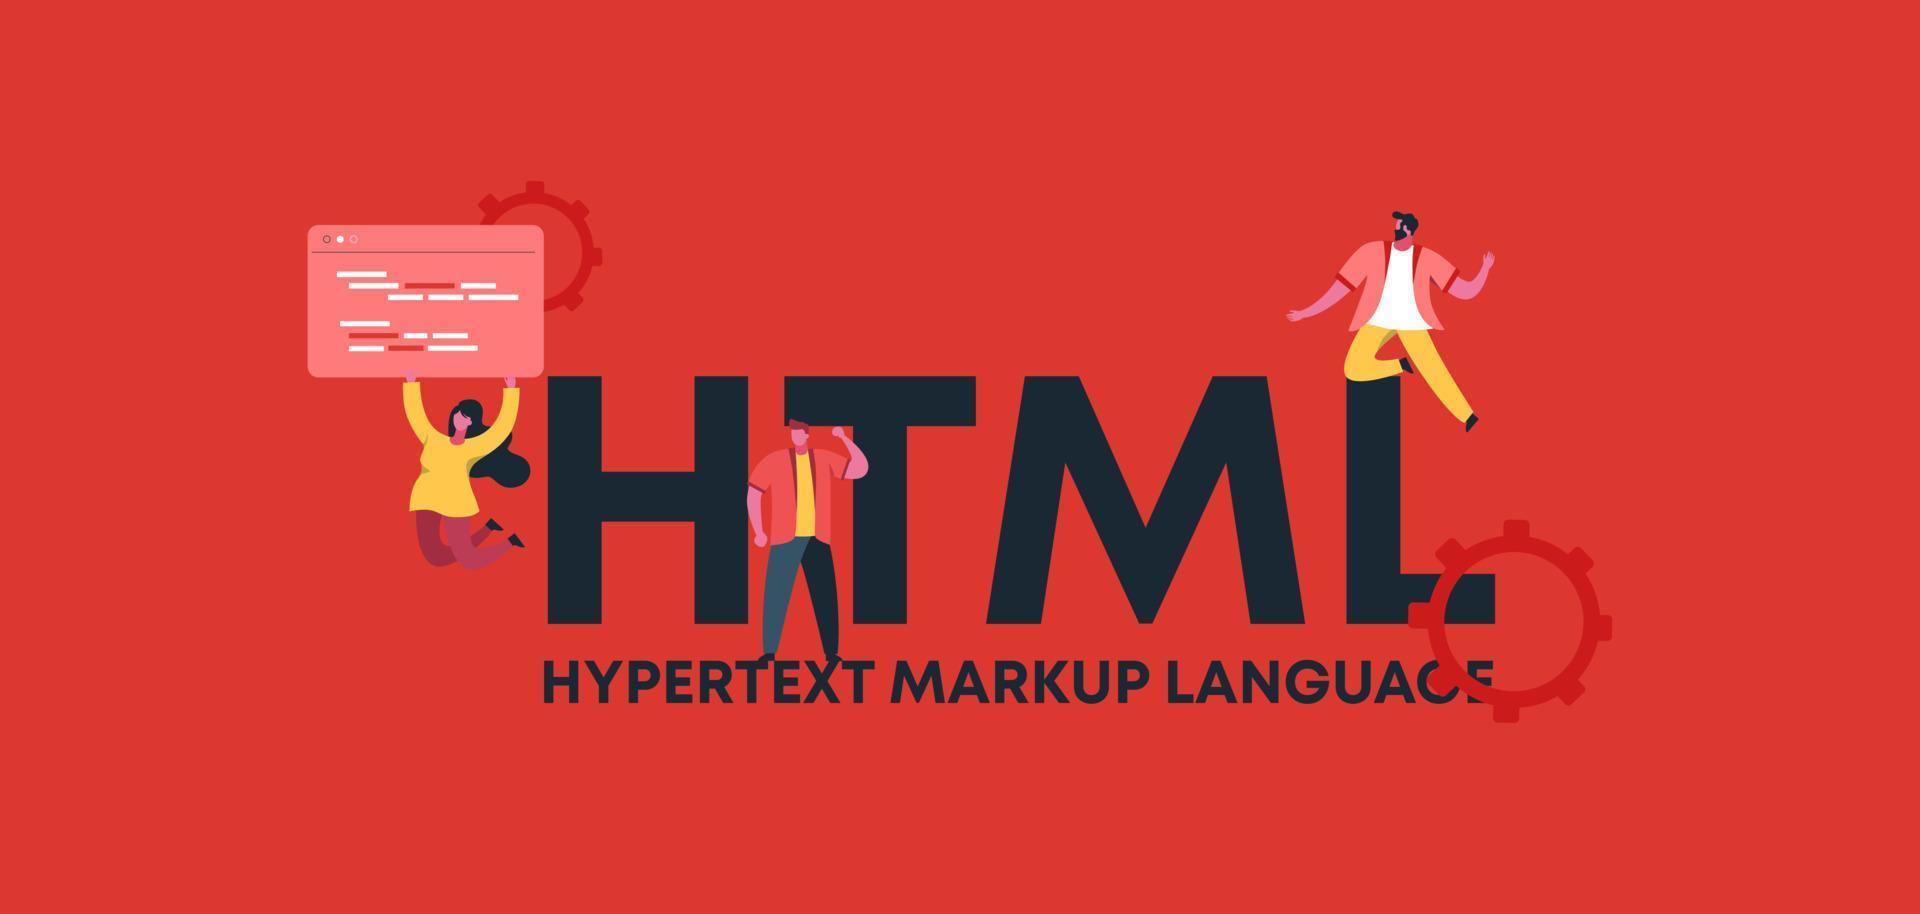 HTML hypertext markup language. Development of online language applications digital graphic scripts and business. vector